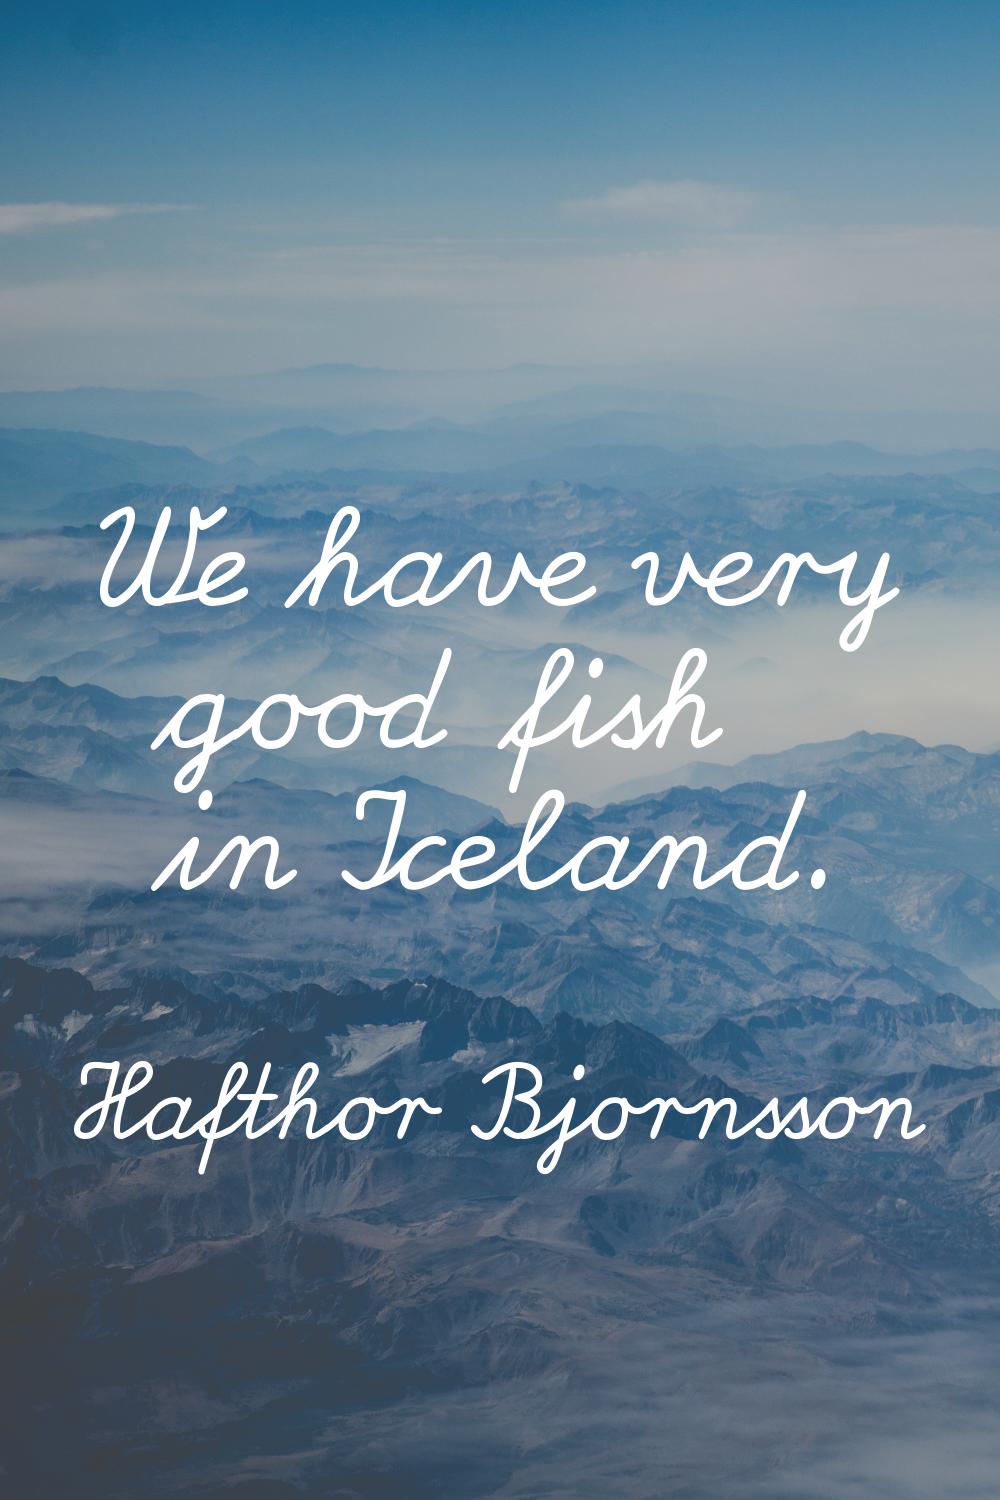 We have very good fish in Iceland.